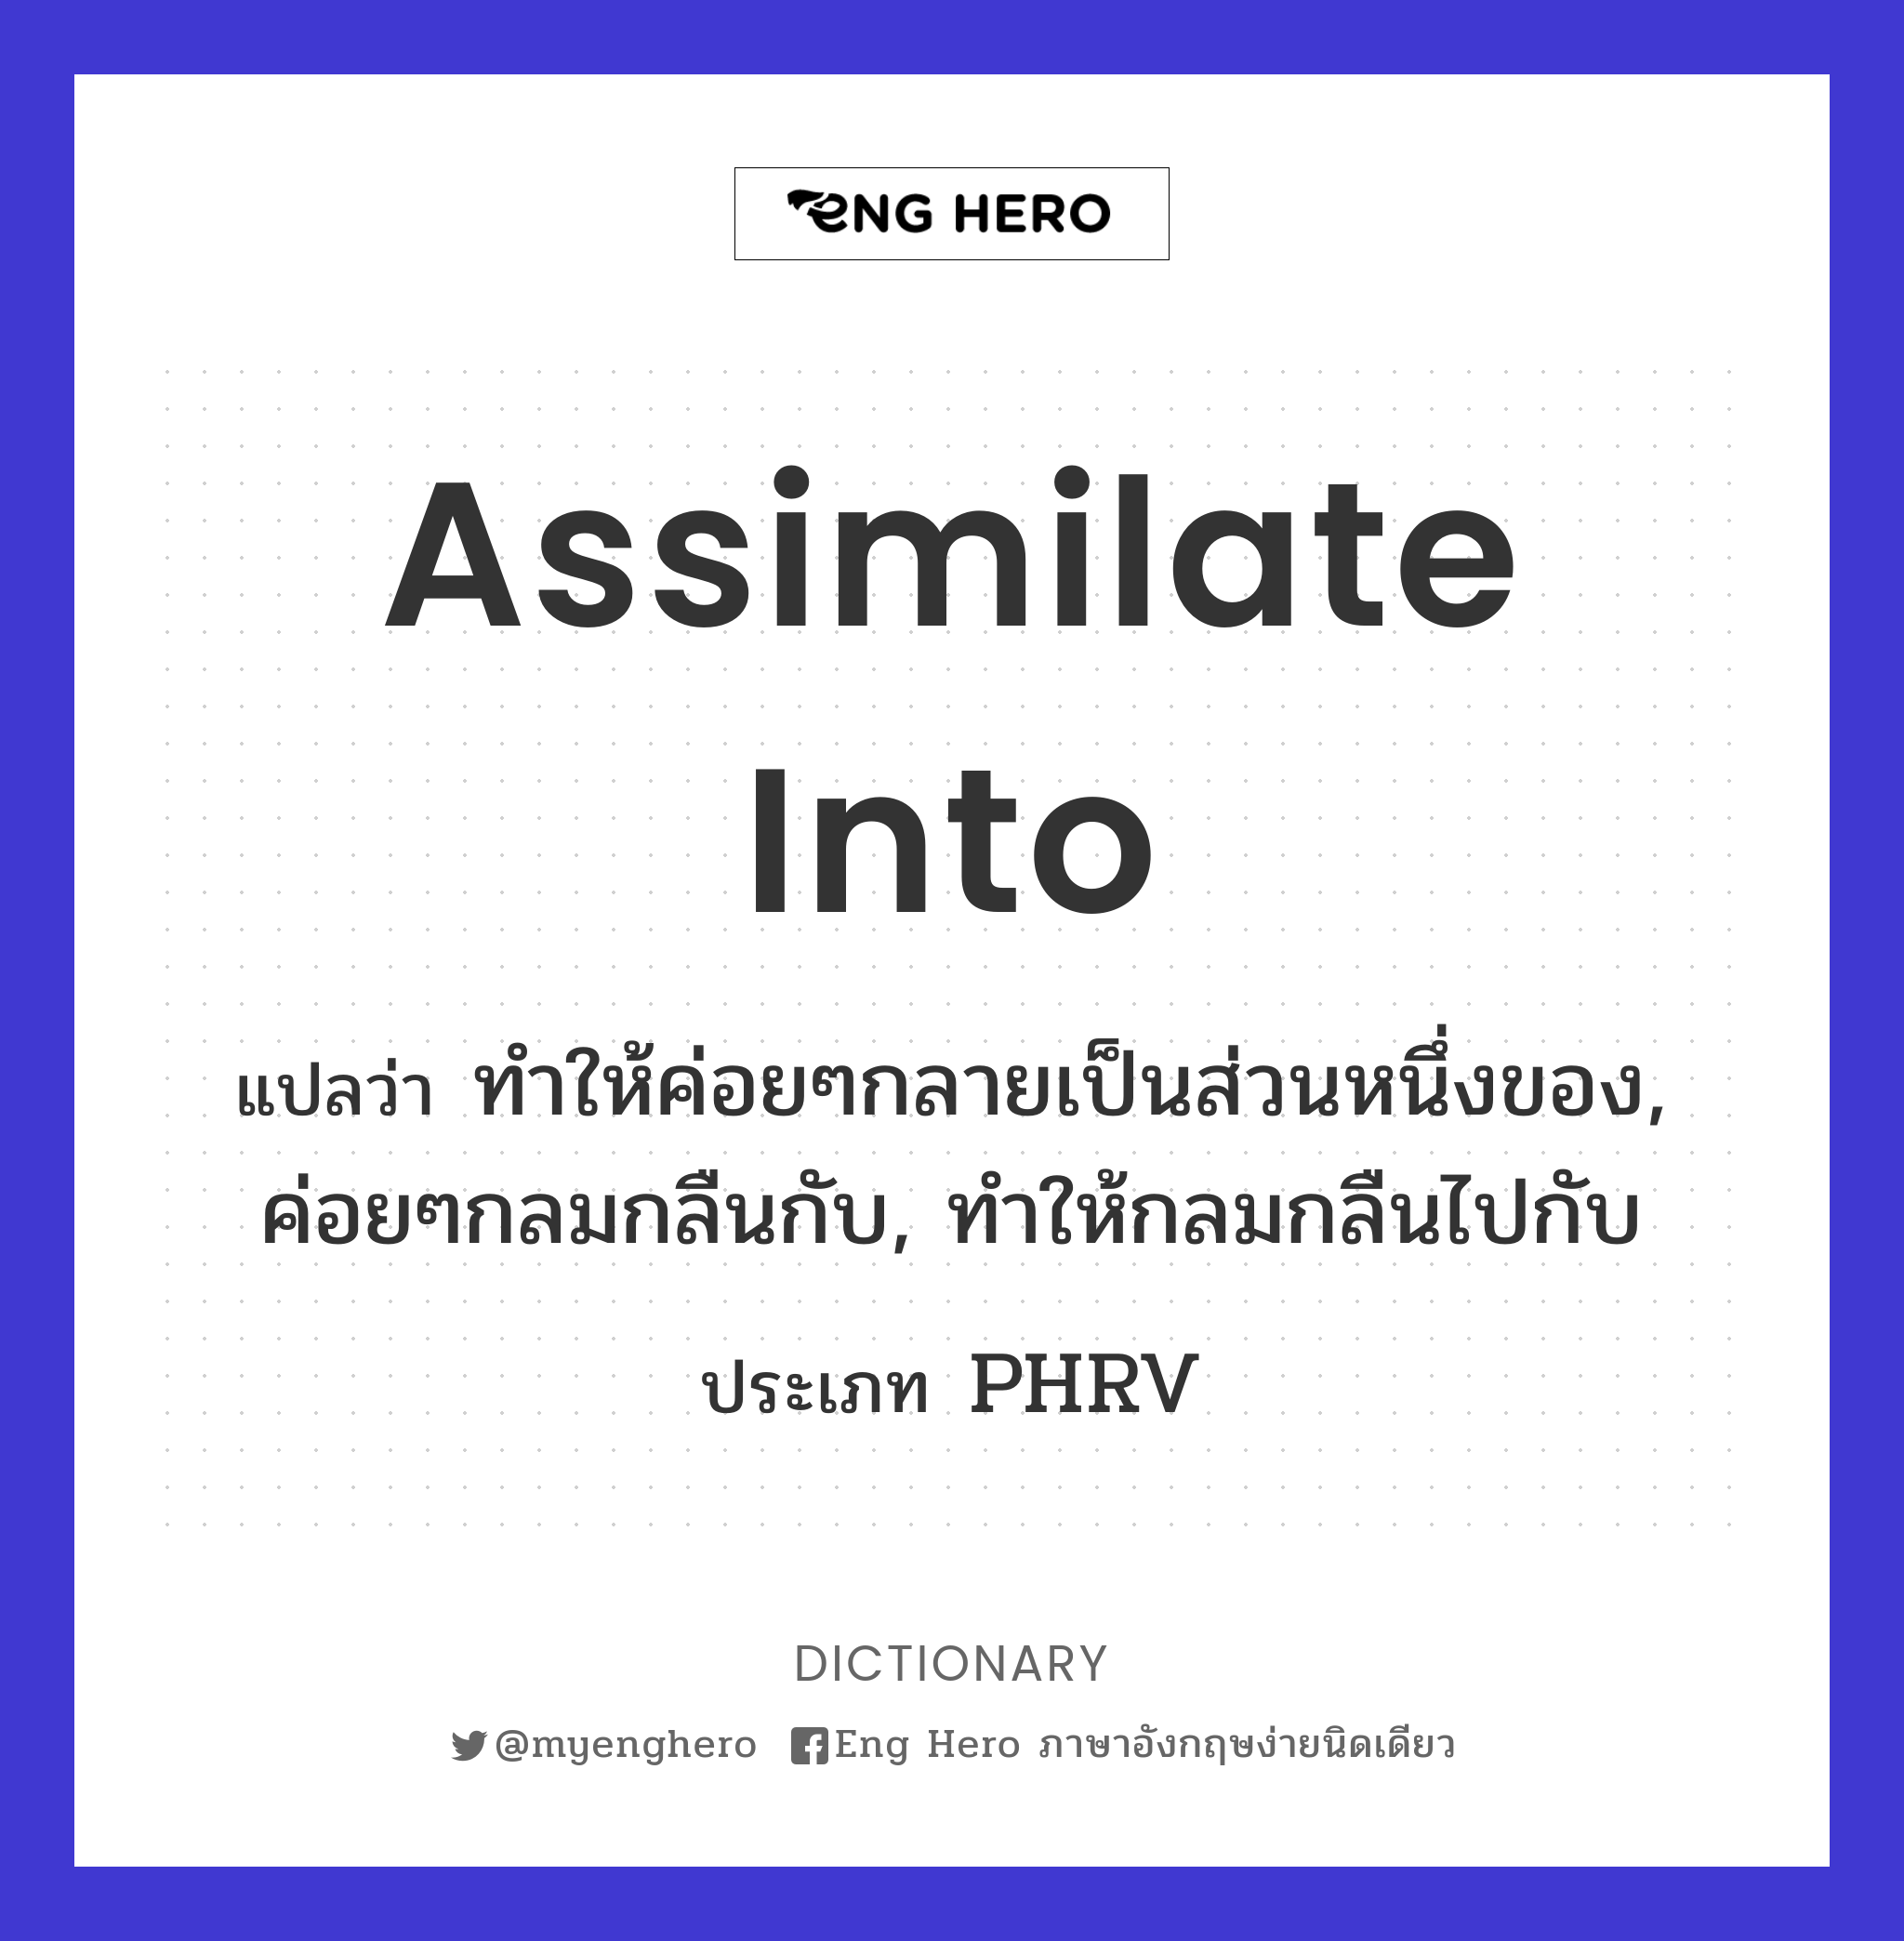 assimilate into